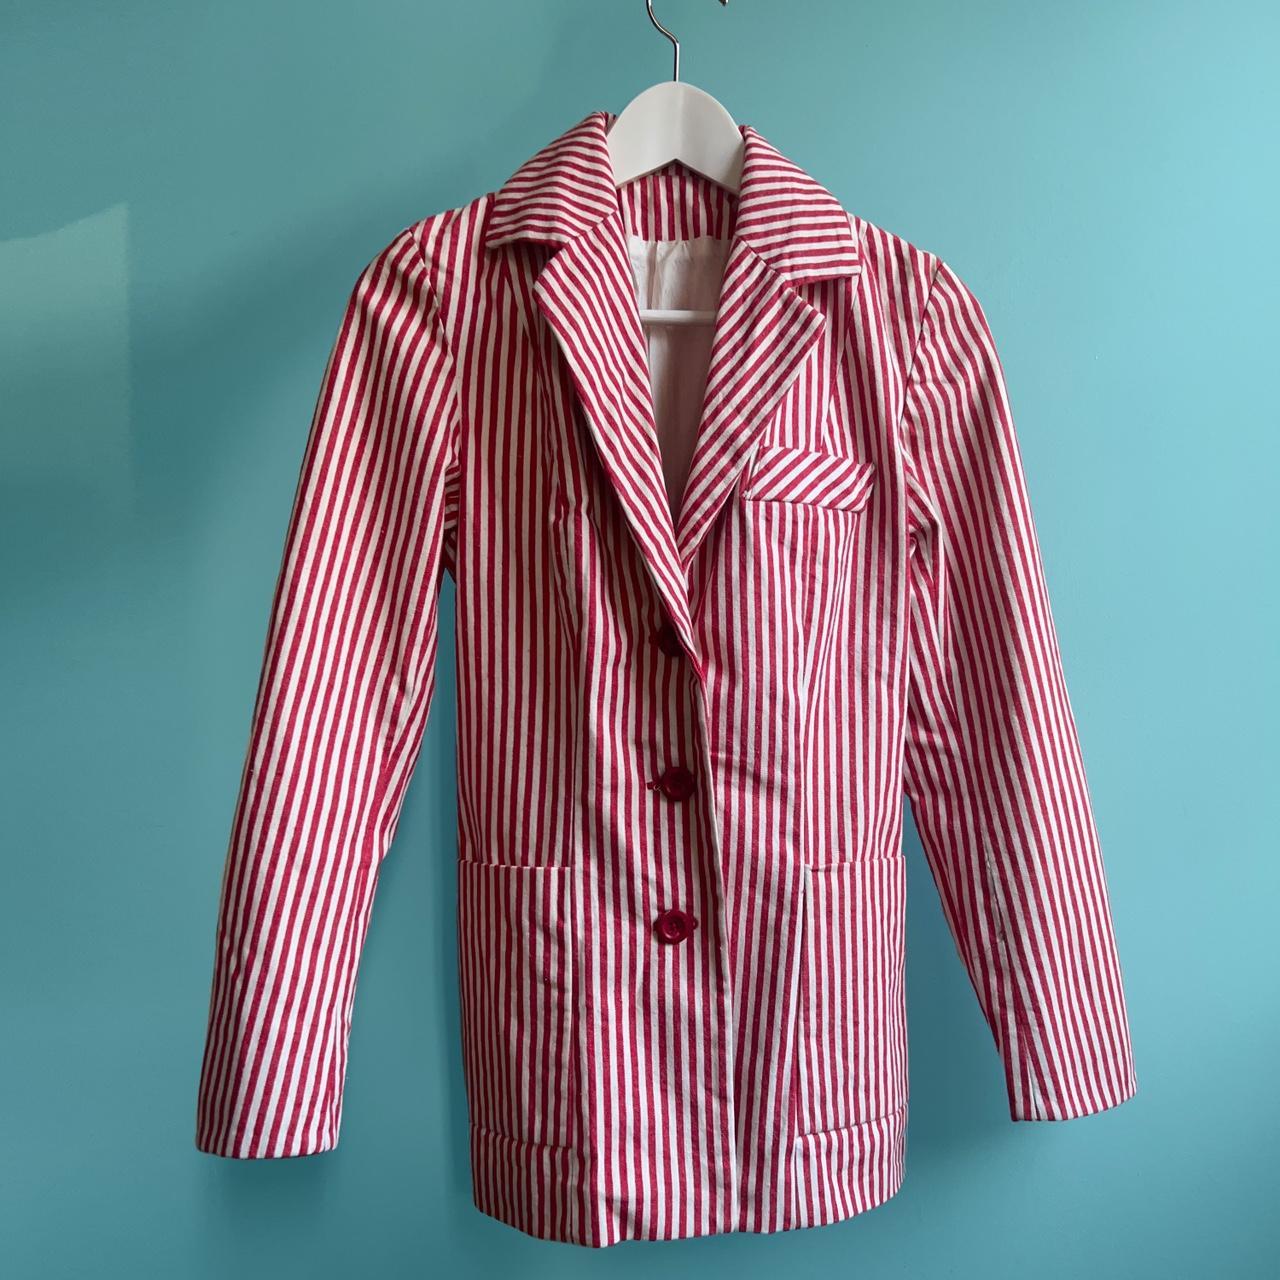 Women's Red and White Jacket | Depop